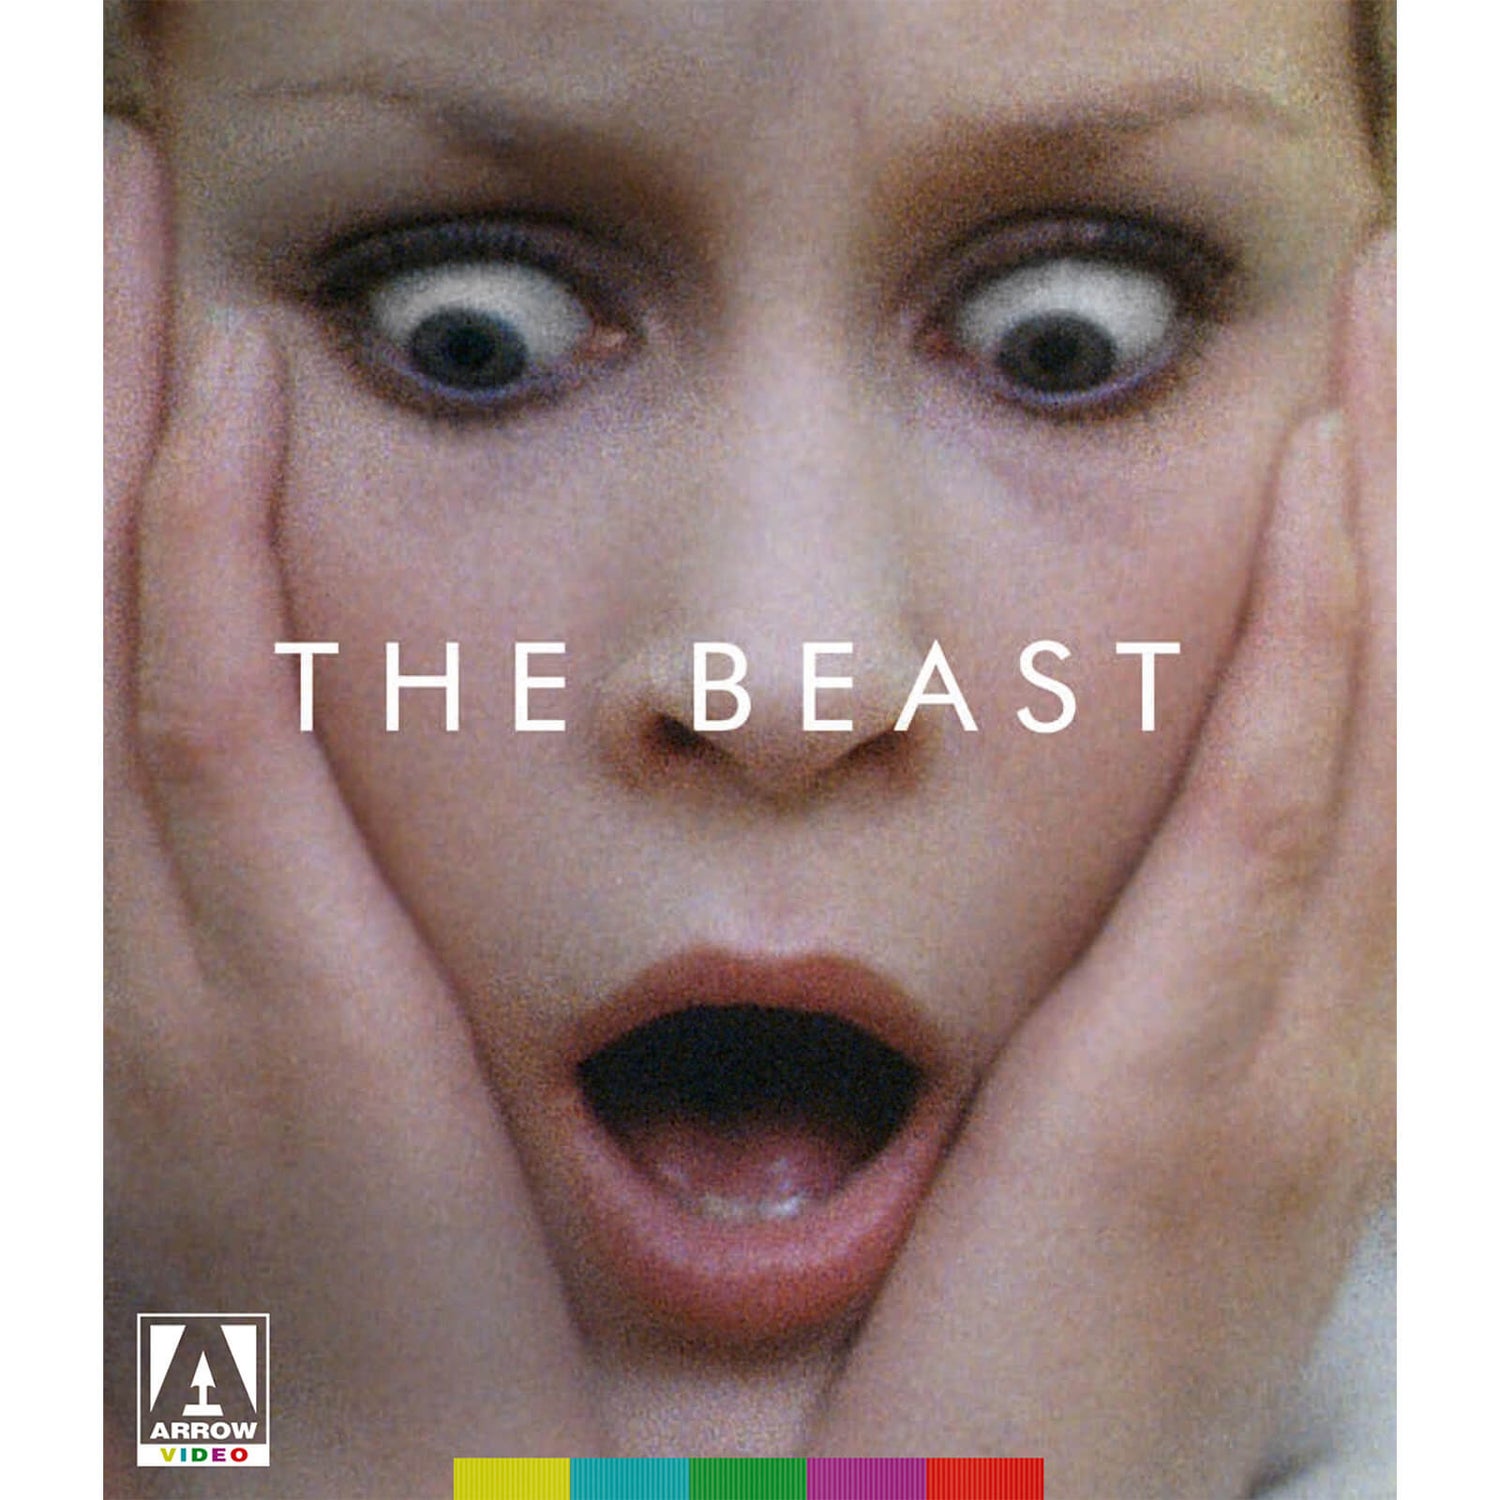 The Beast (Includes DVD)